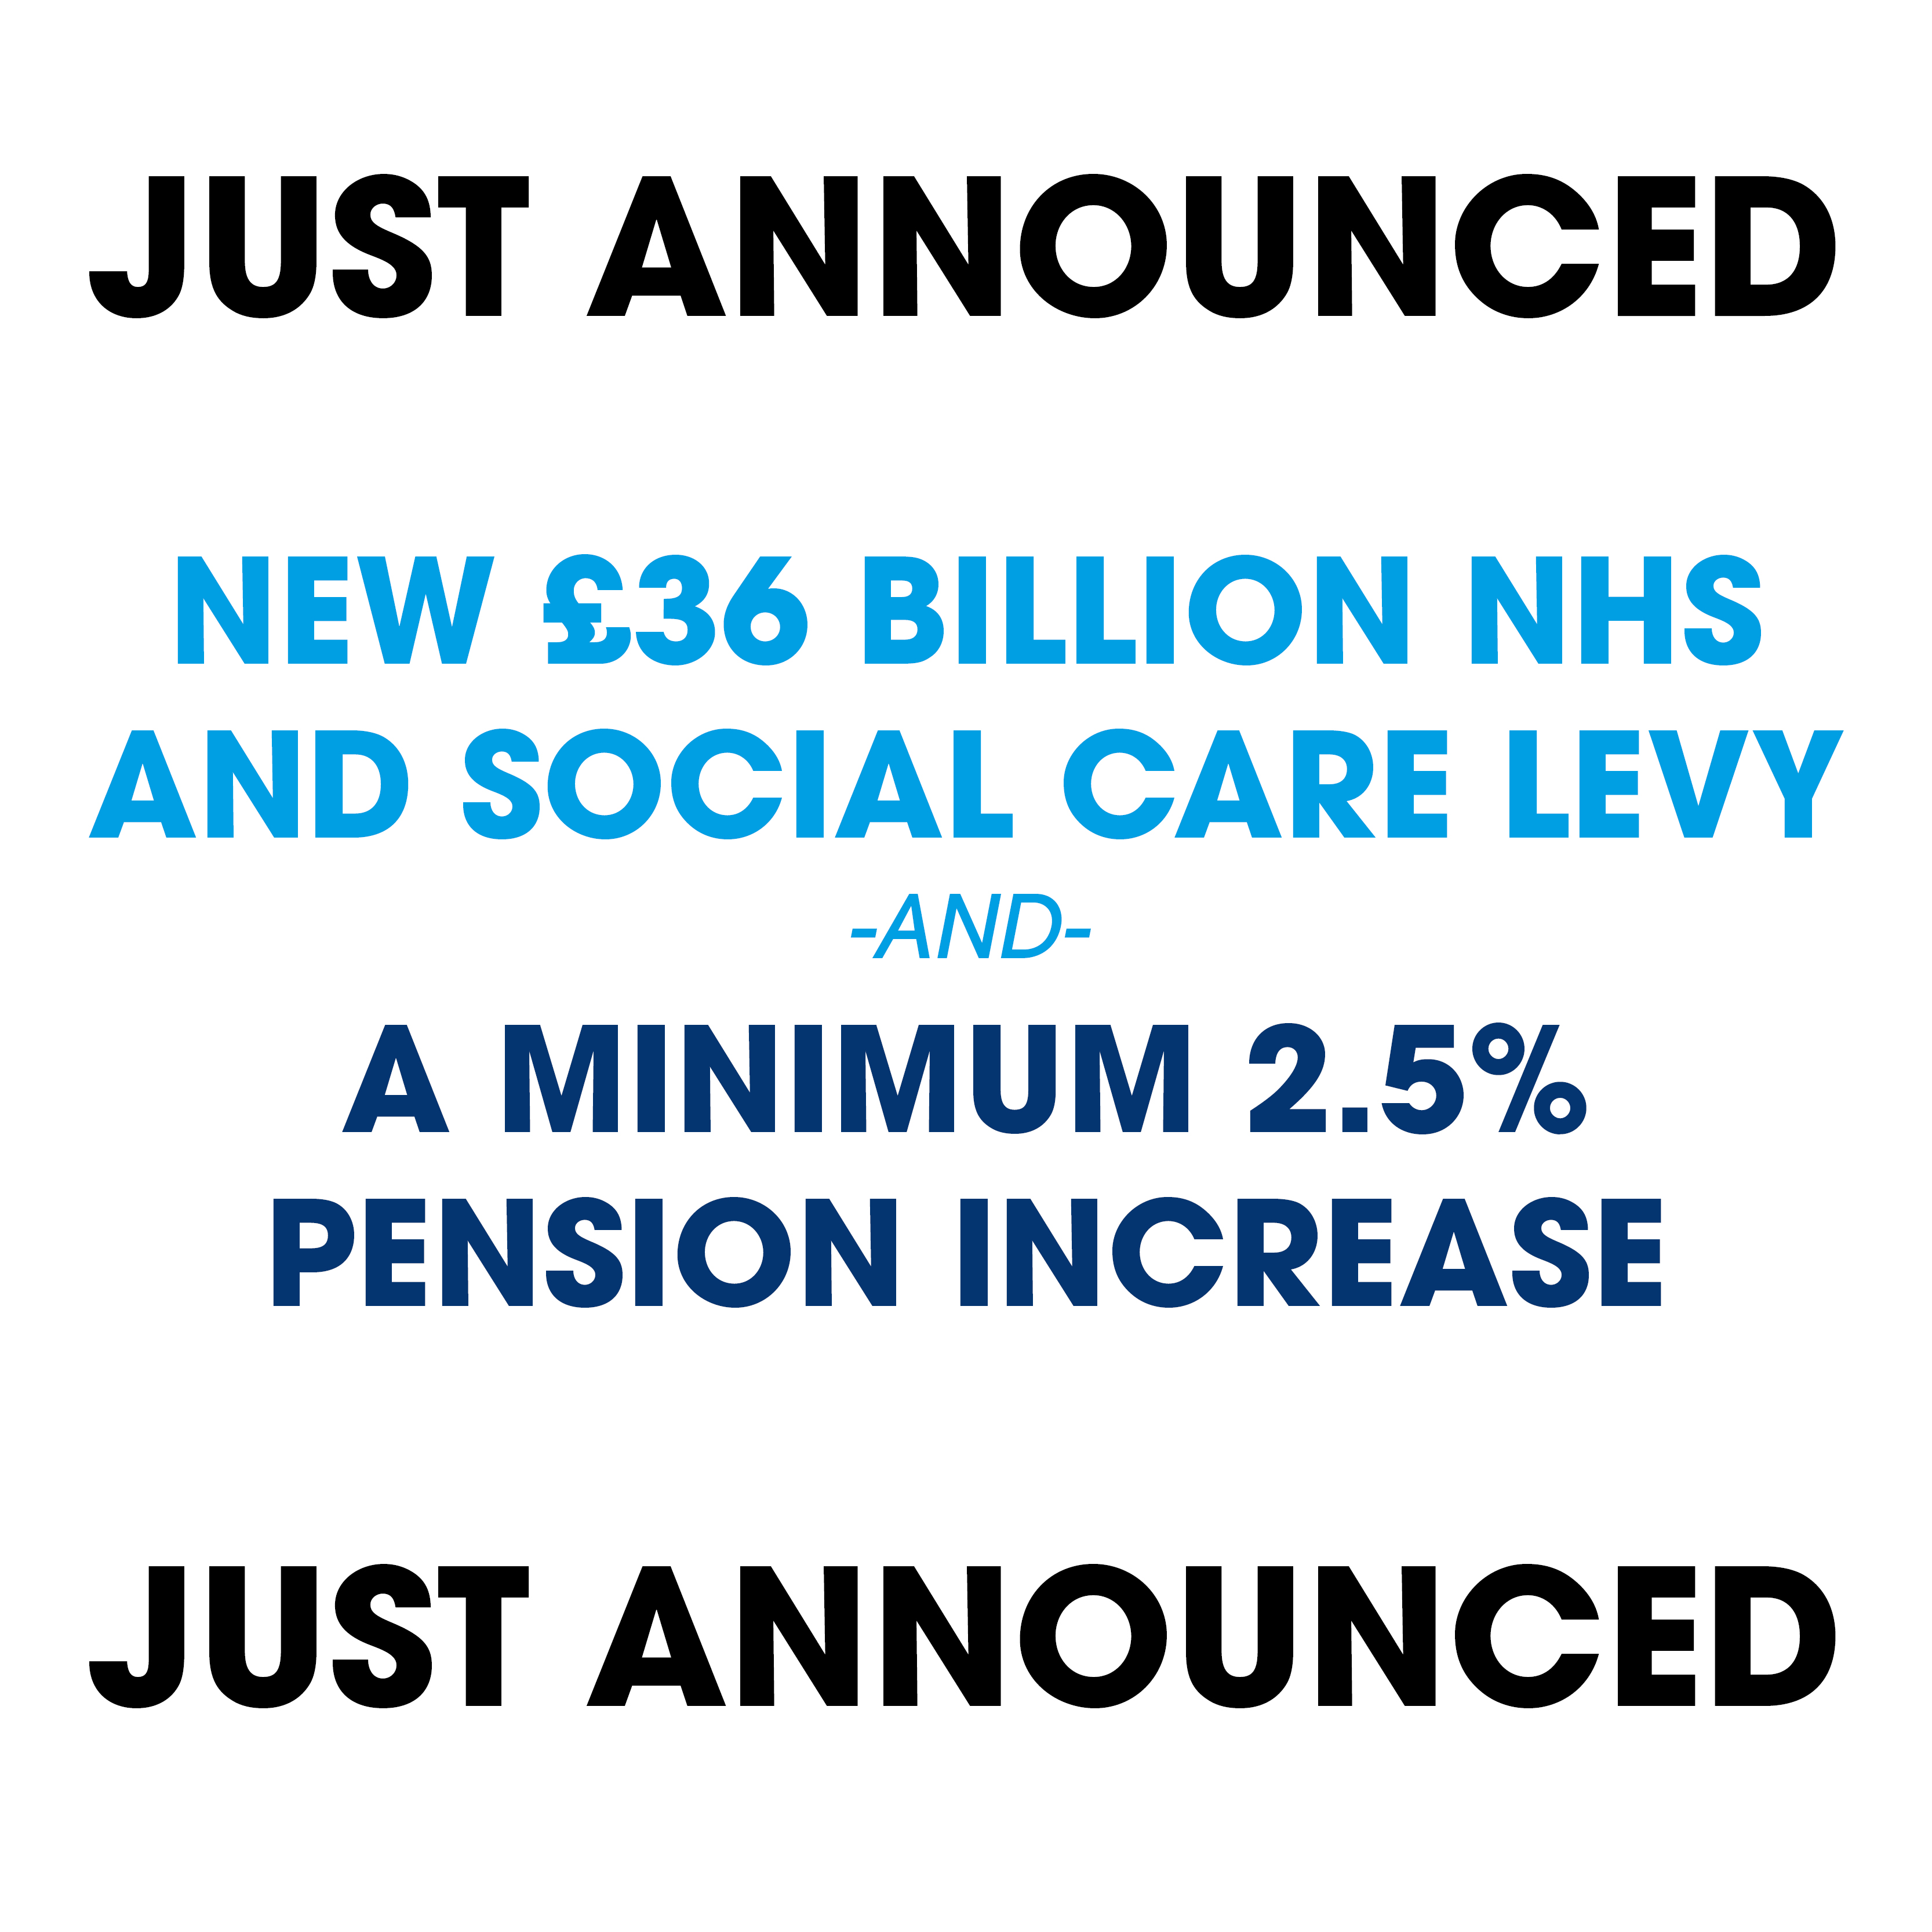 Statement on new £36 billion NHS and Social Care Levy and minimum 2.5